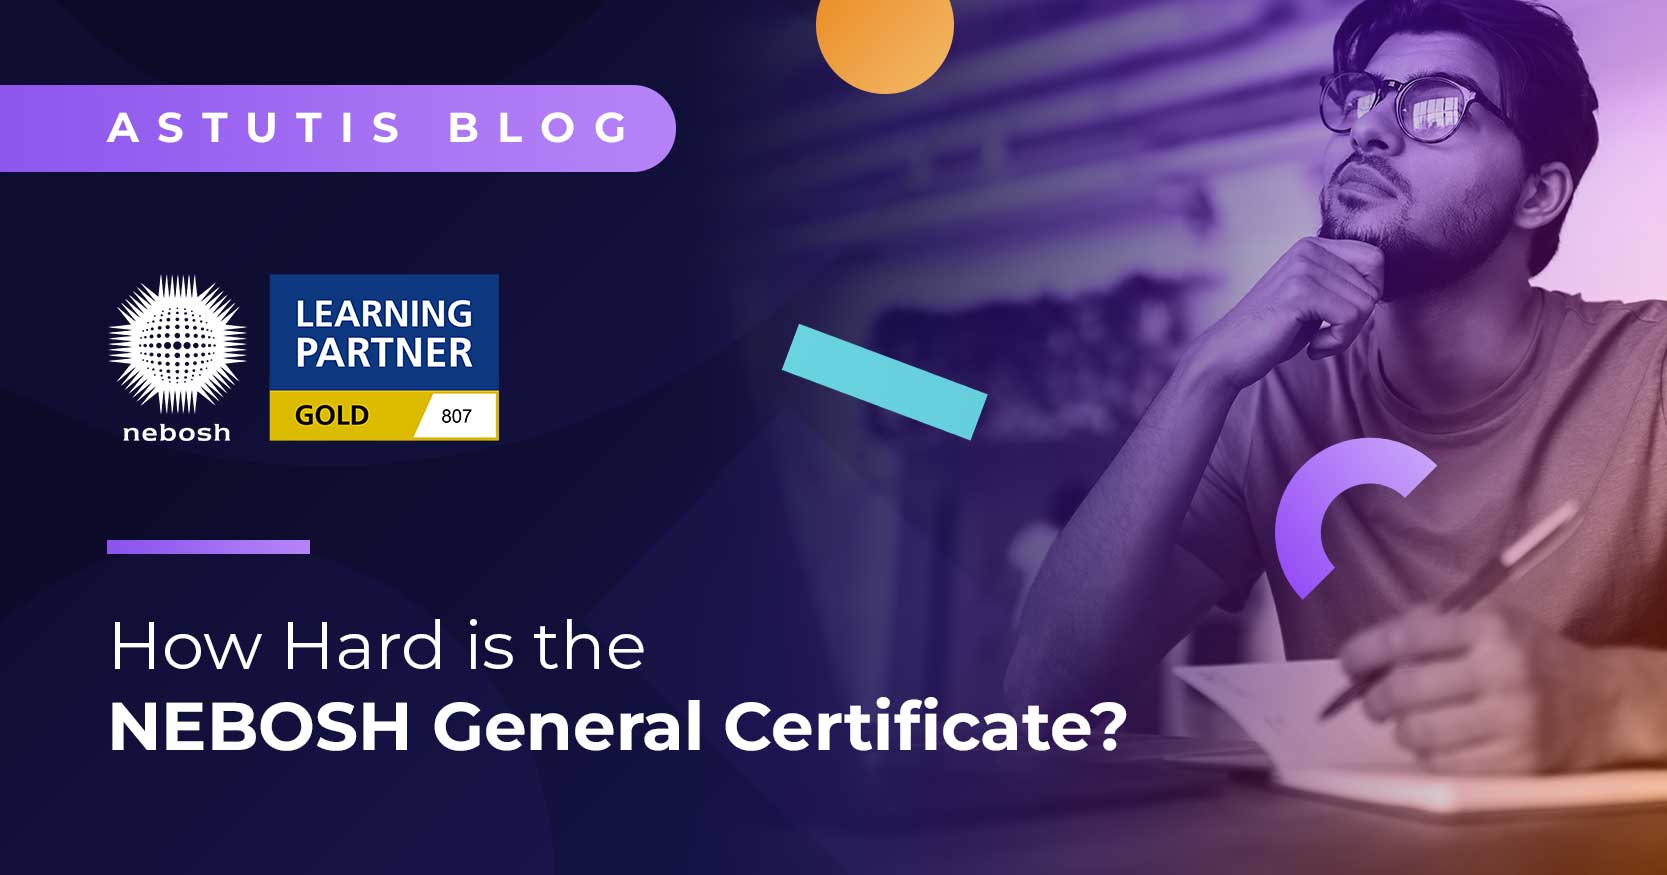 How hard is the NEBOSH General Certificate? Image